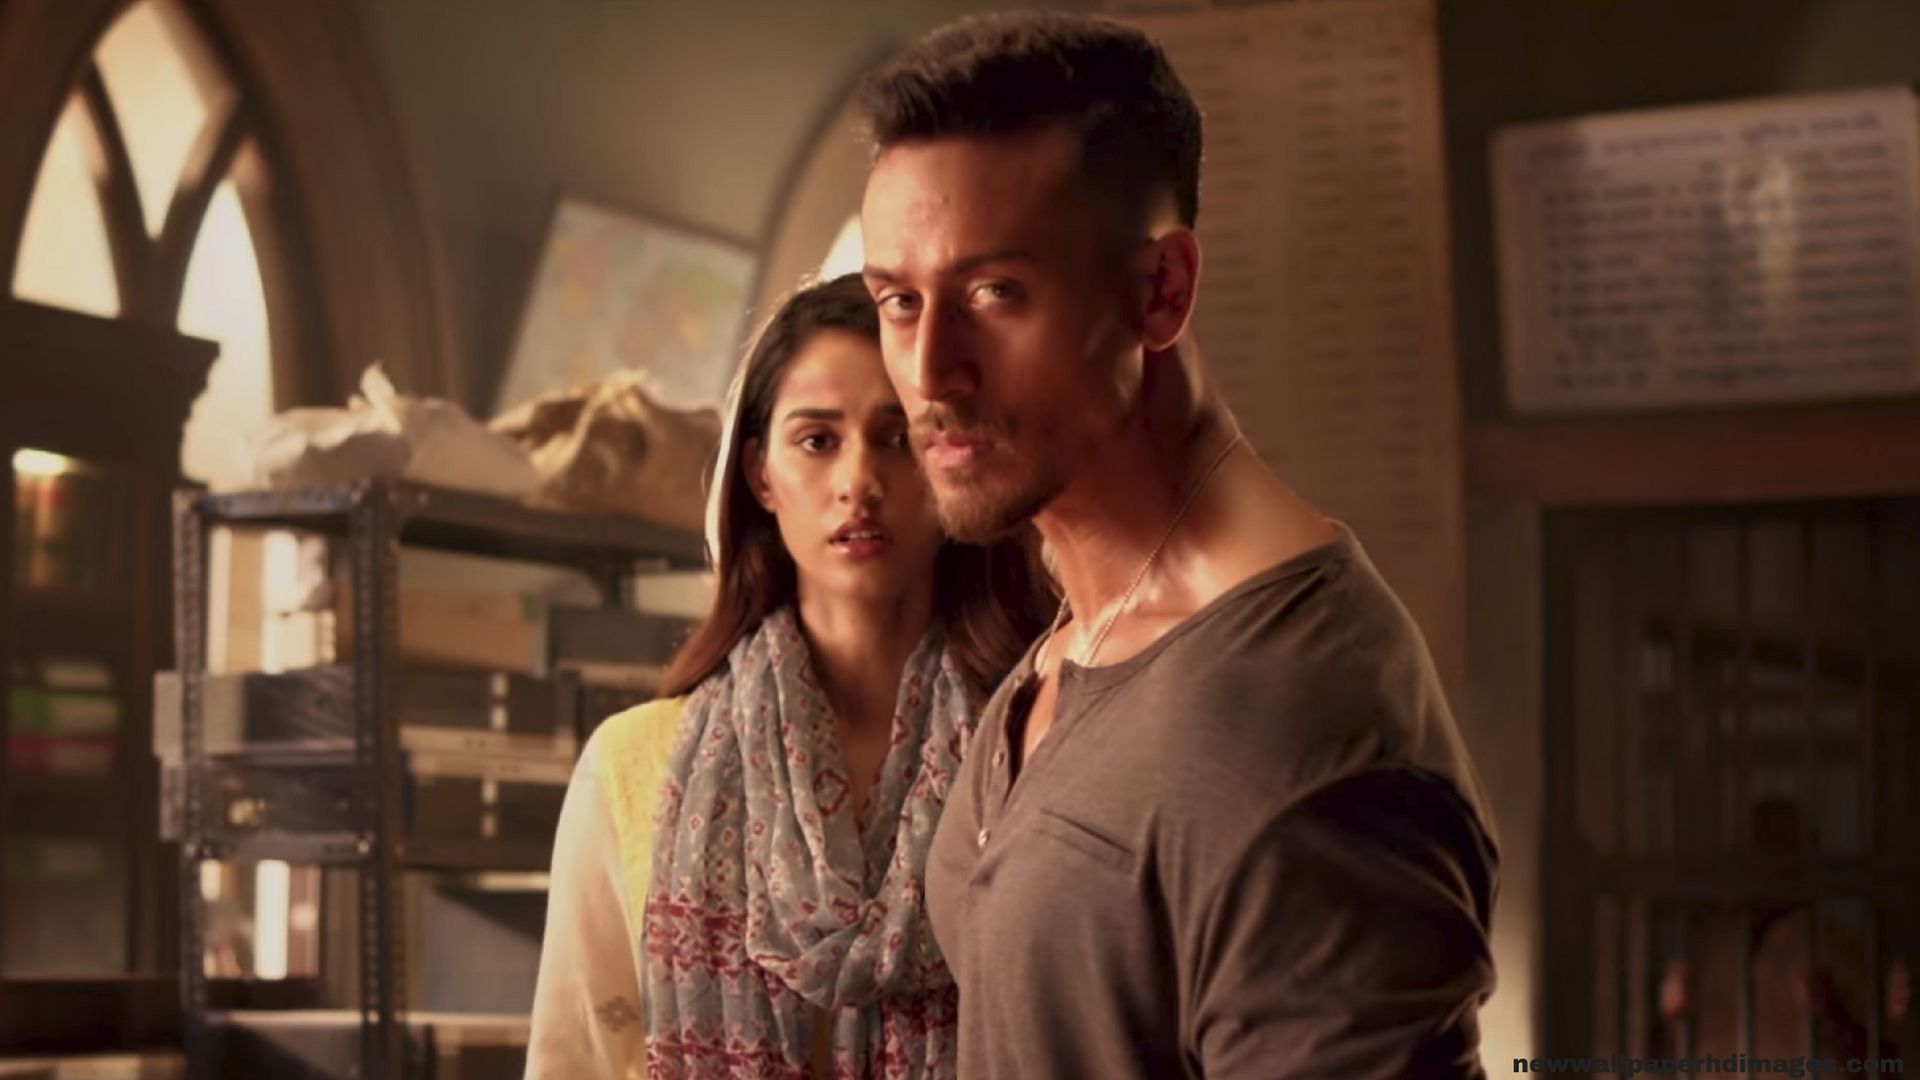 2018 Movie Baaghi 2 Free Hd Wallpapers And Images Download - Tiger Shroff In Baaghi 2 , HD Wallpaper & Backgrounds